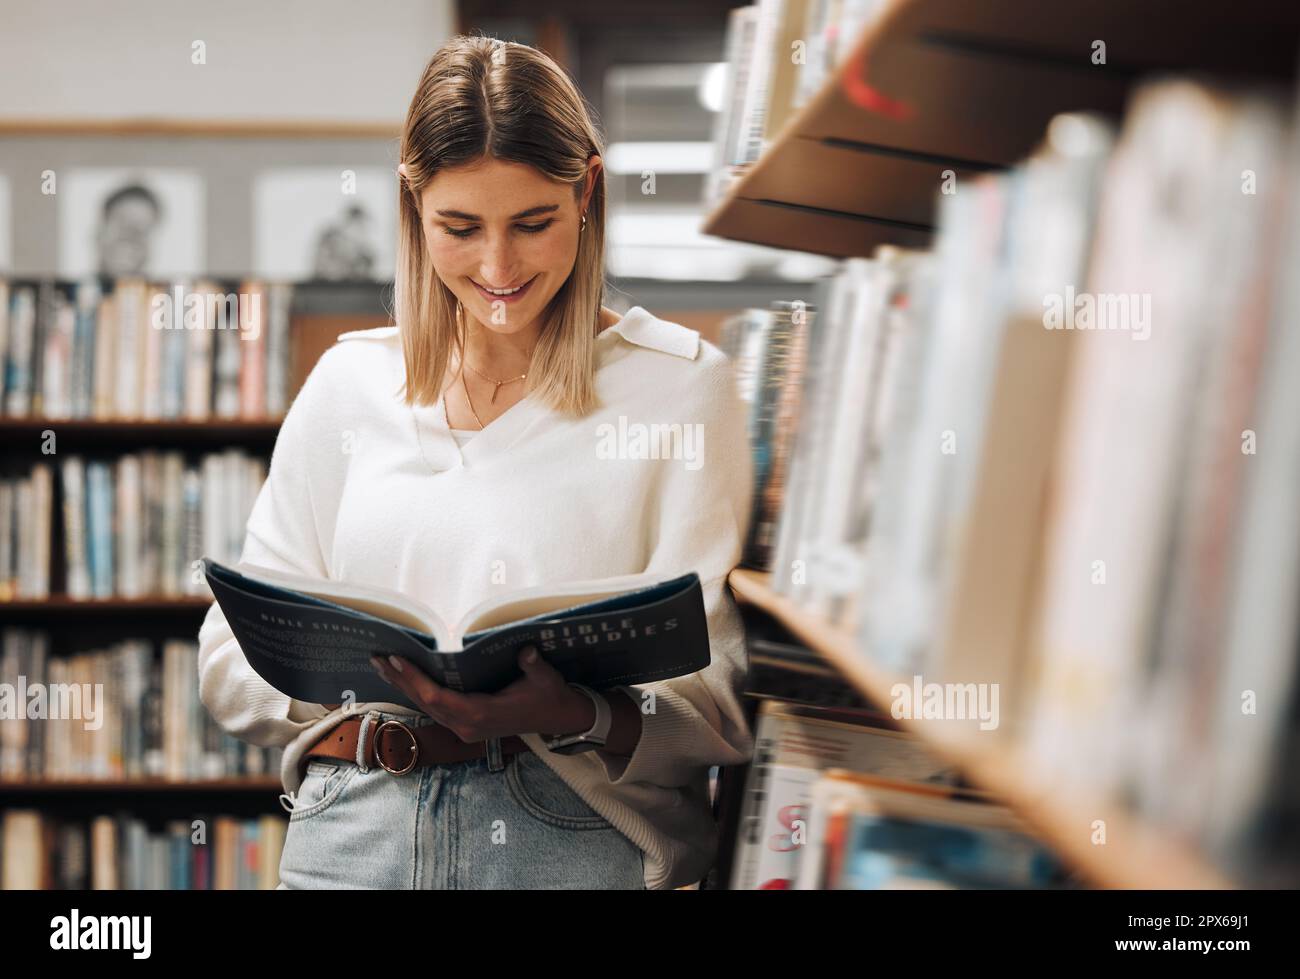 Happy, reading or student in library for books, educational knowledge or research for learning or assessment. School girl, college or university stude Stock Photo